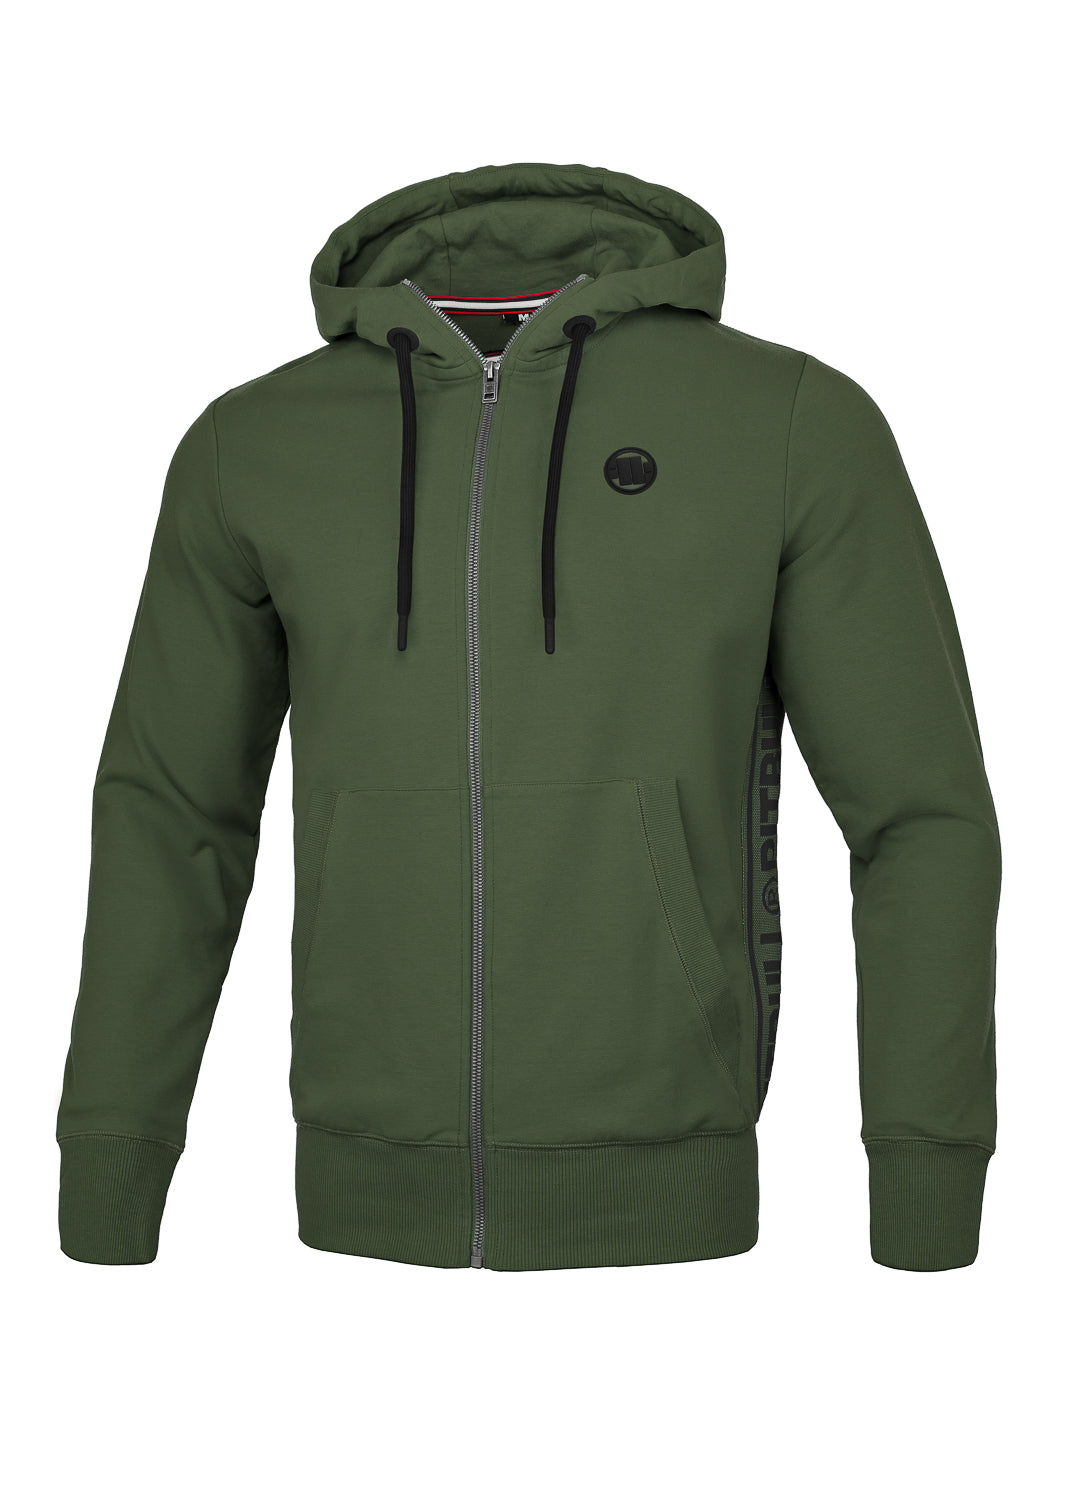 Hooded Zip French Terry RENO Olive - Pitbull West Coast International Store 